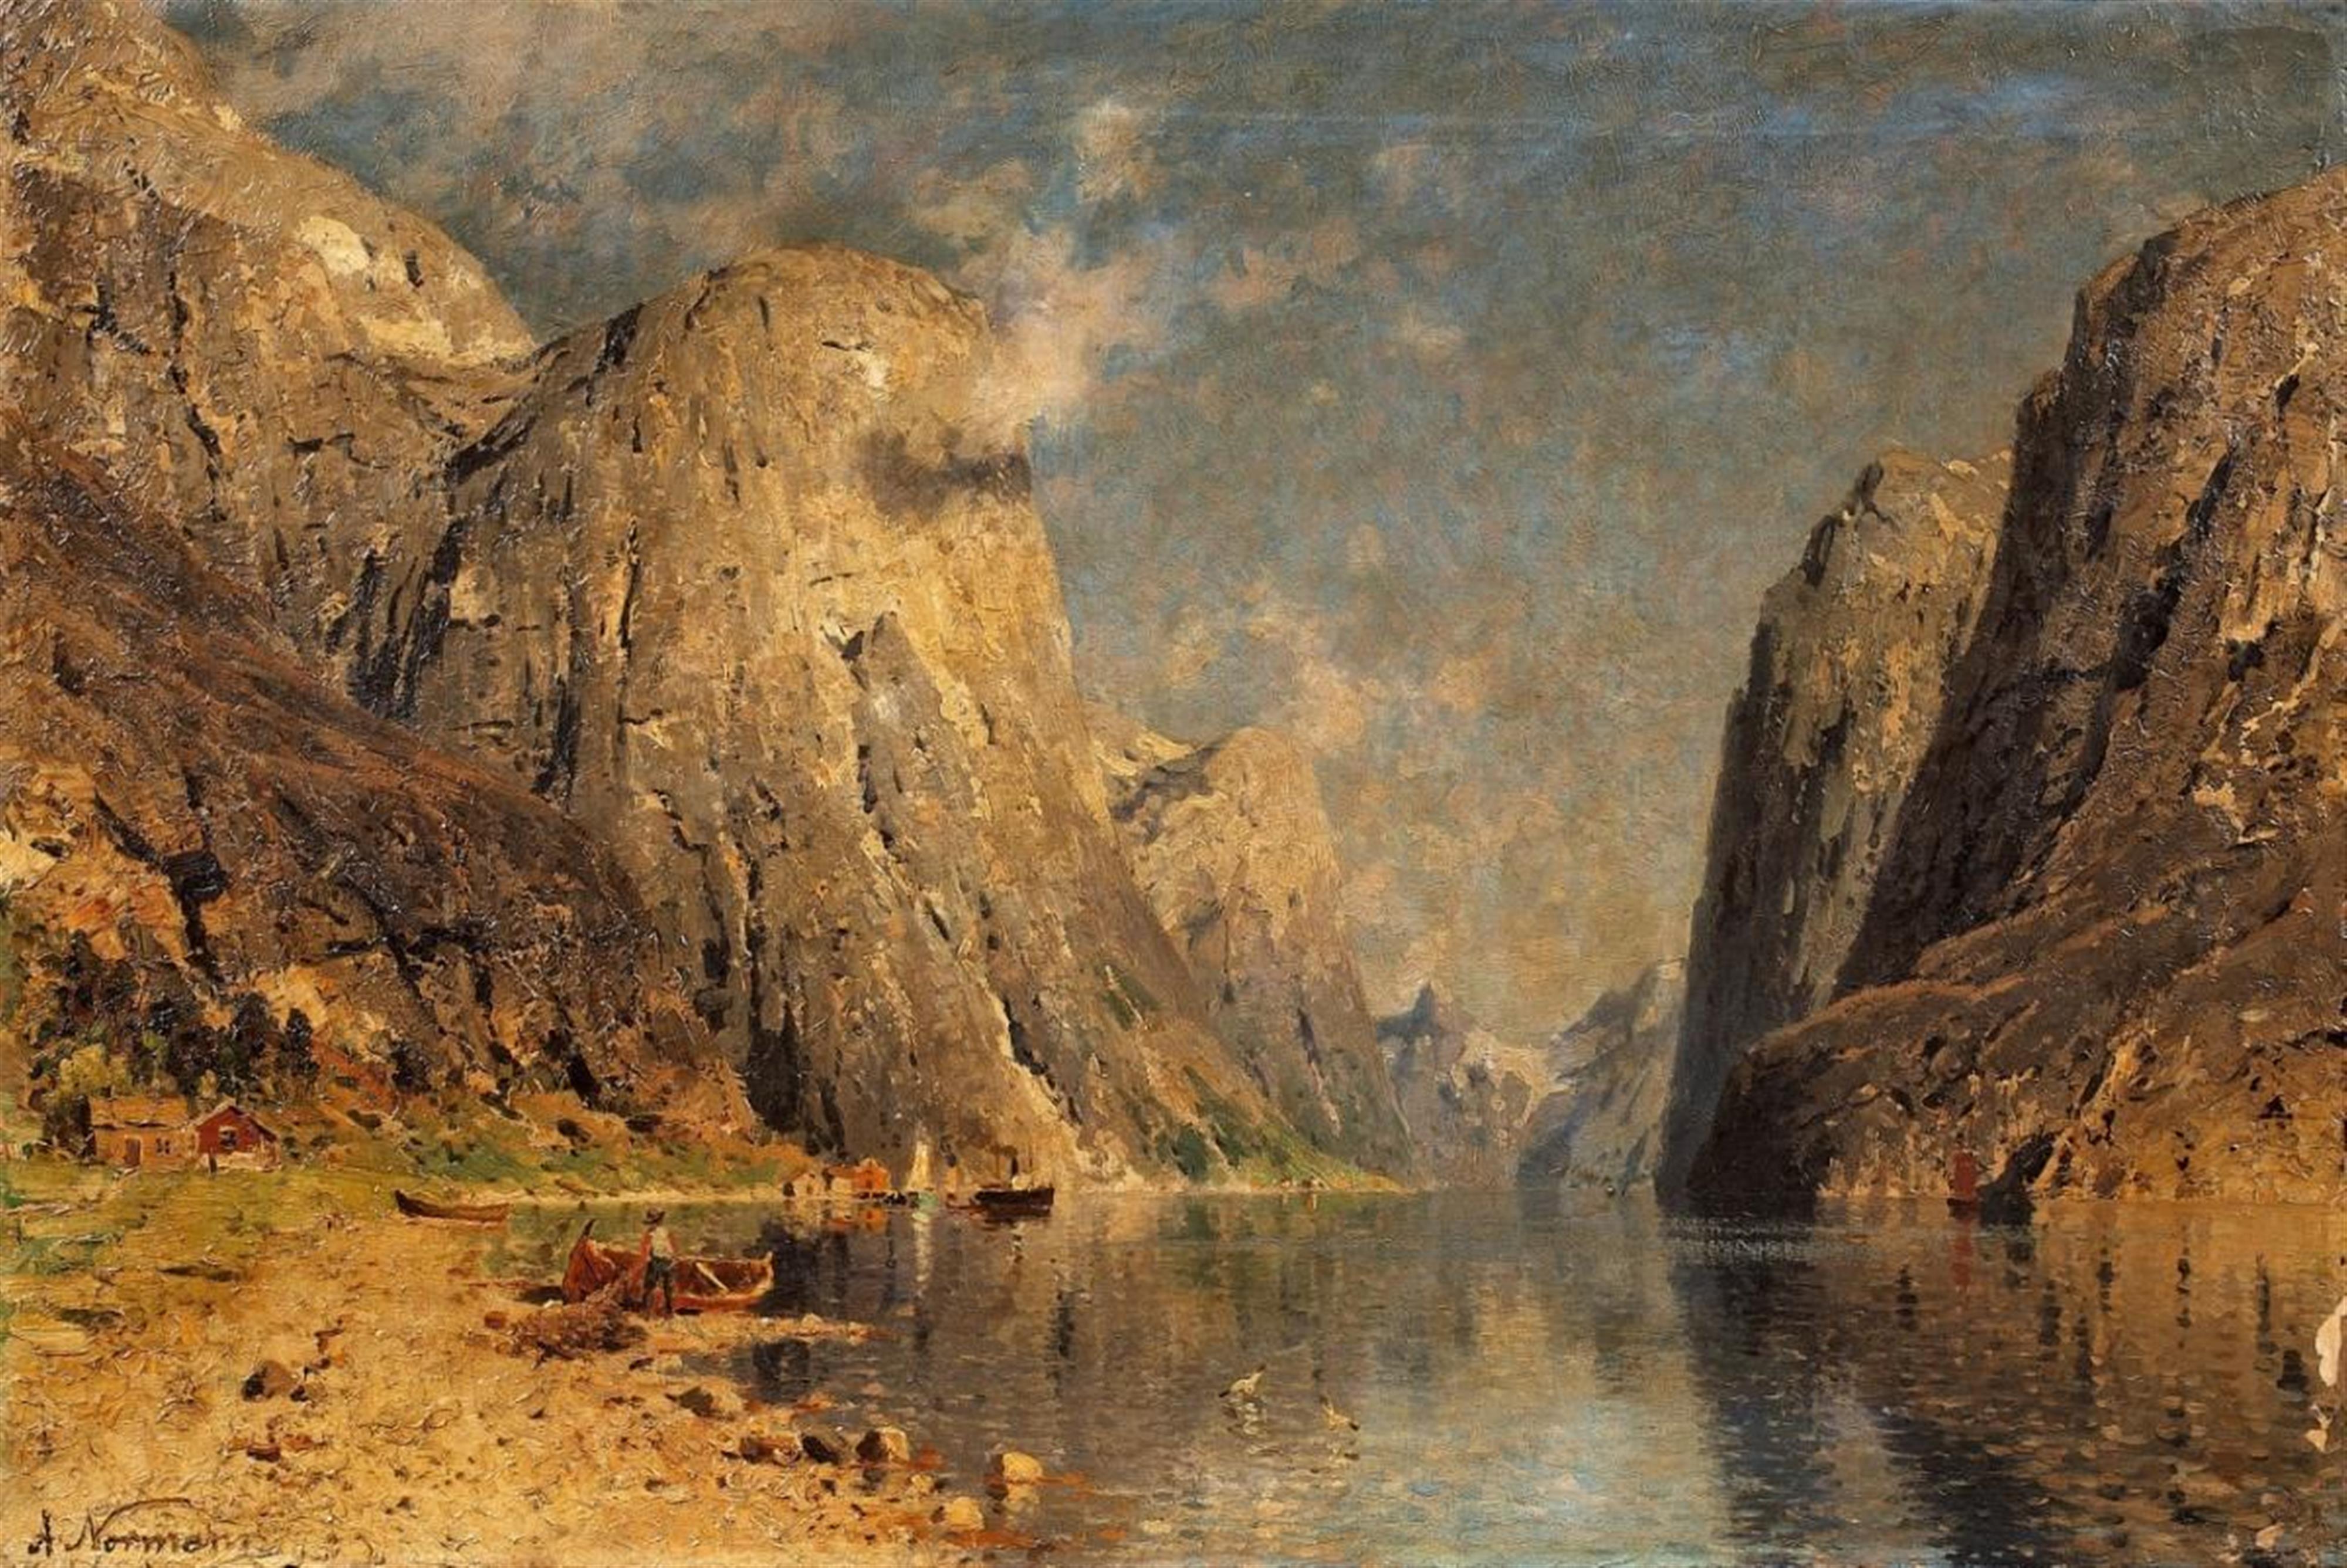 Adelsteen Normann - SOGNEFJORD - image-1